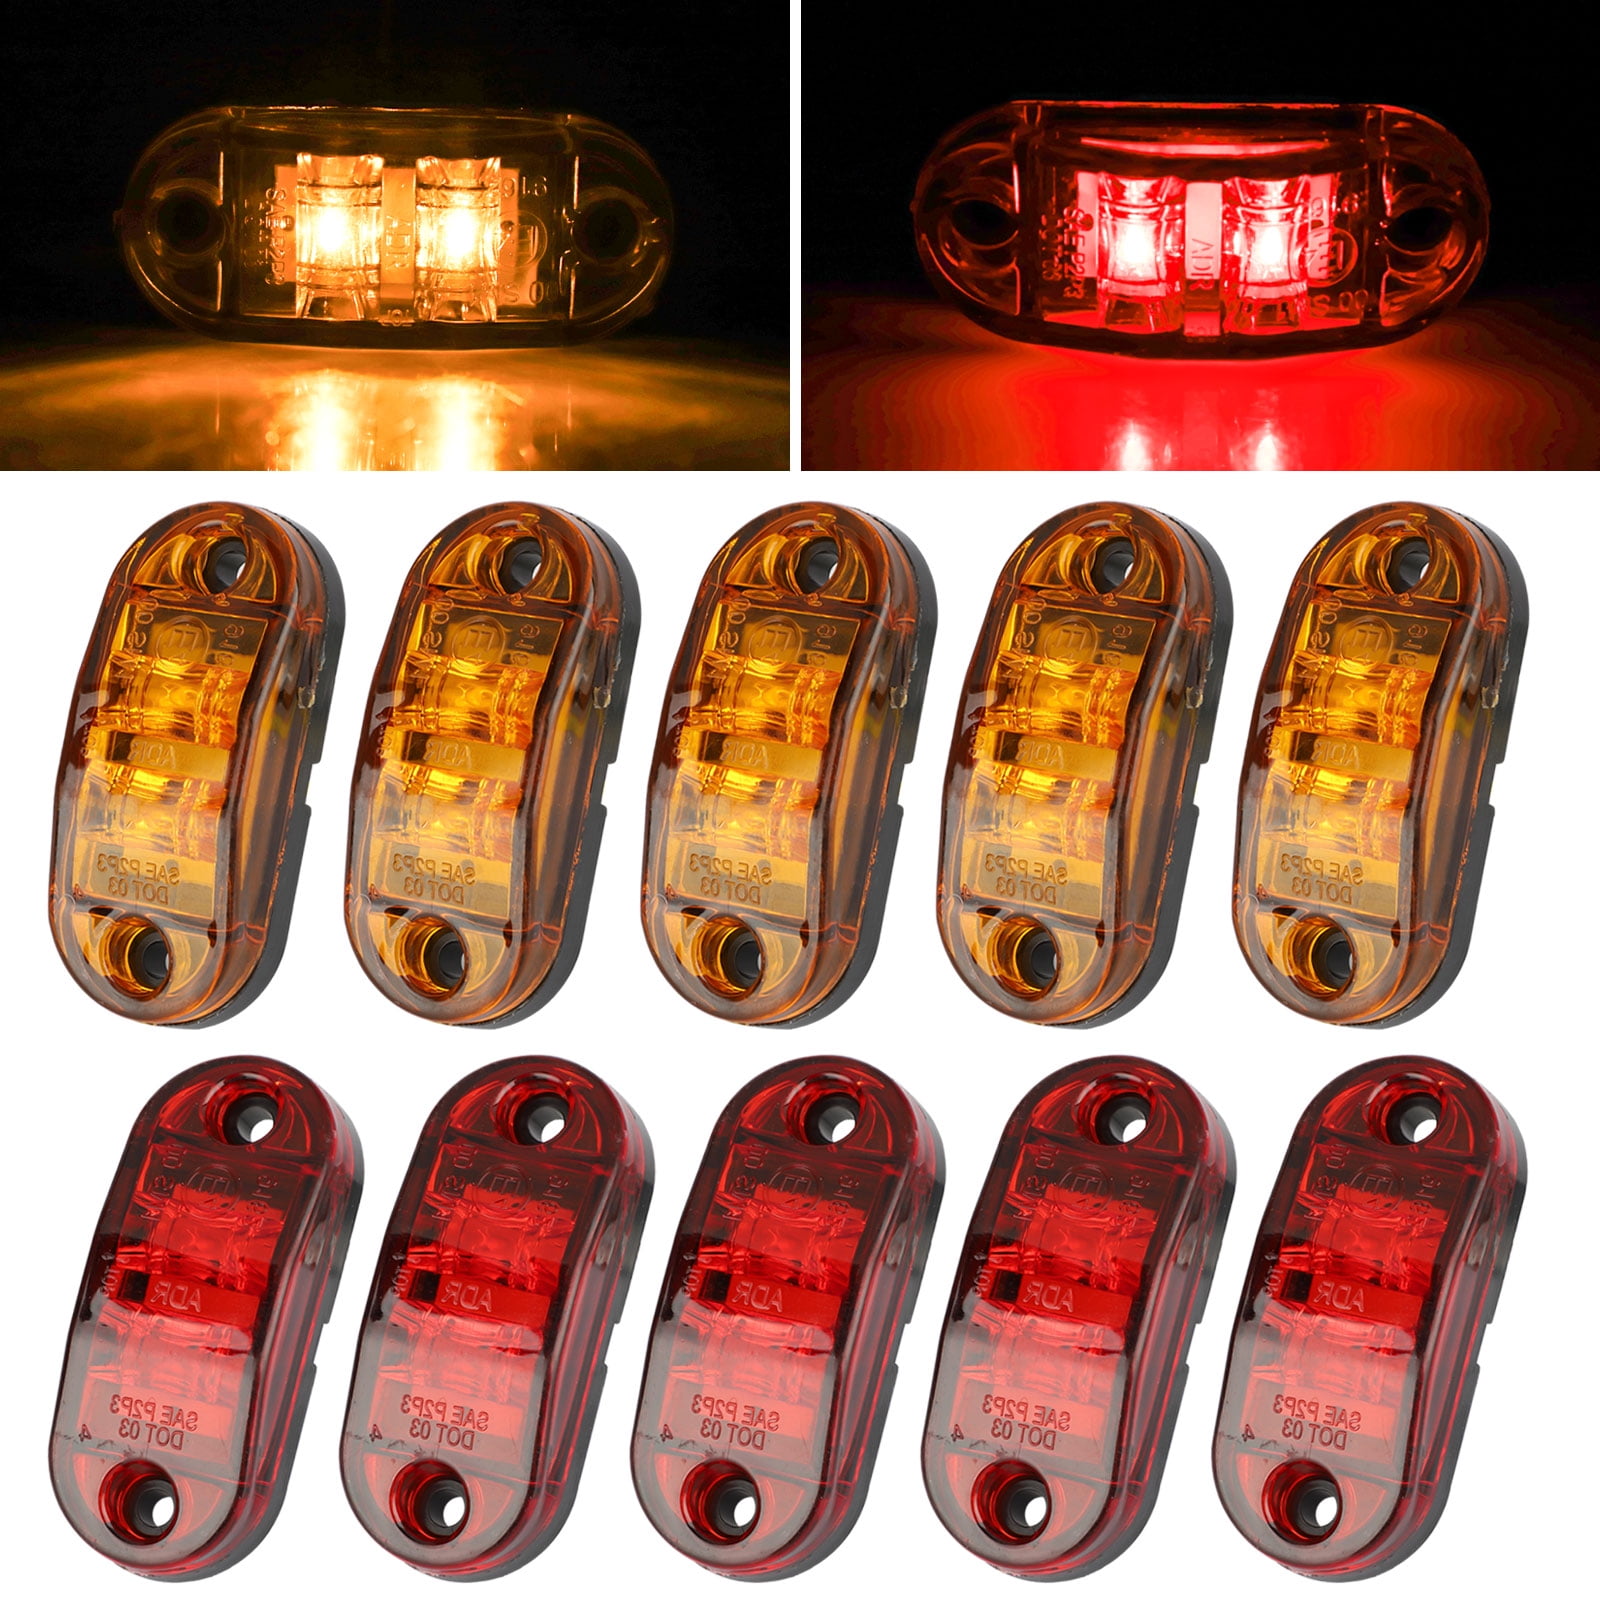 10x Red/Amber RV Light 6LED Clearance Trailer 4" x 2" Side Marker Waterproof 12V 